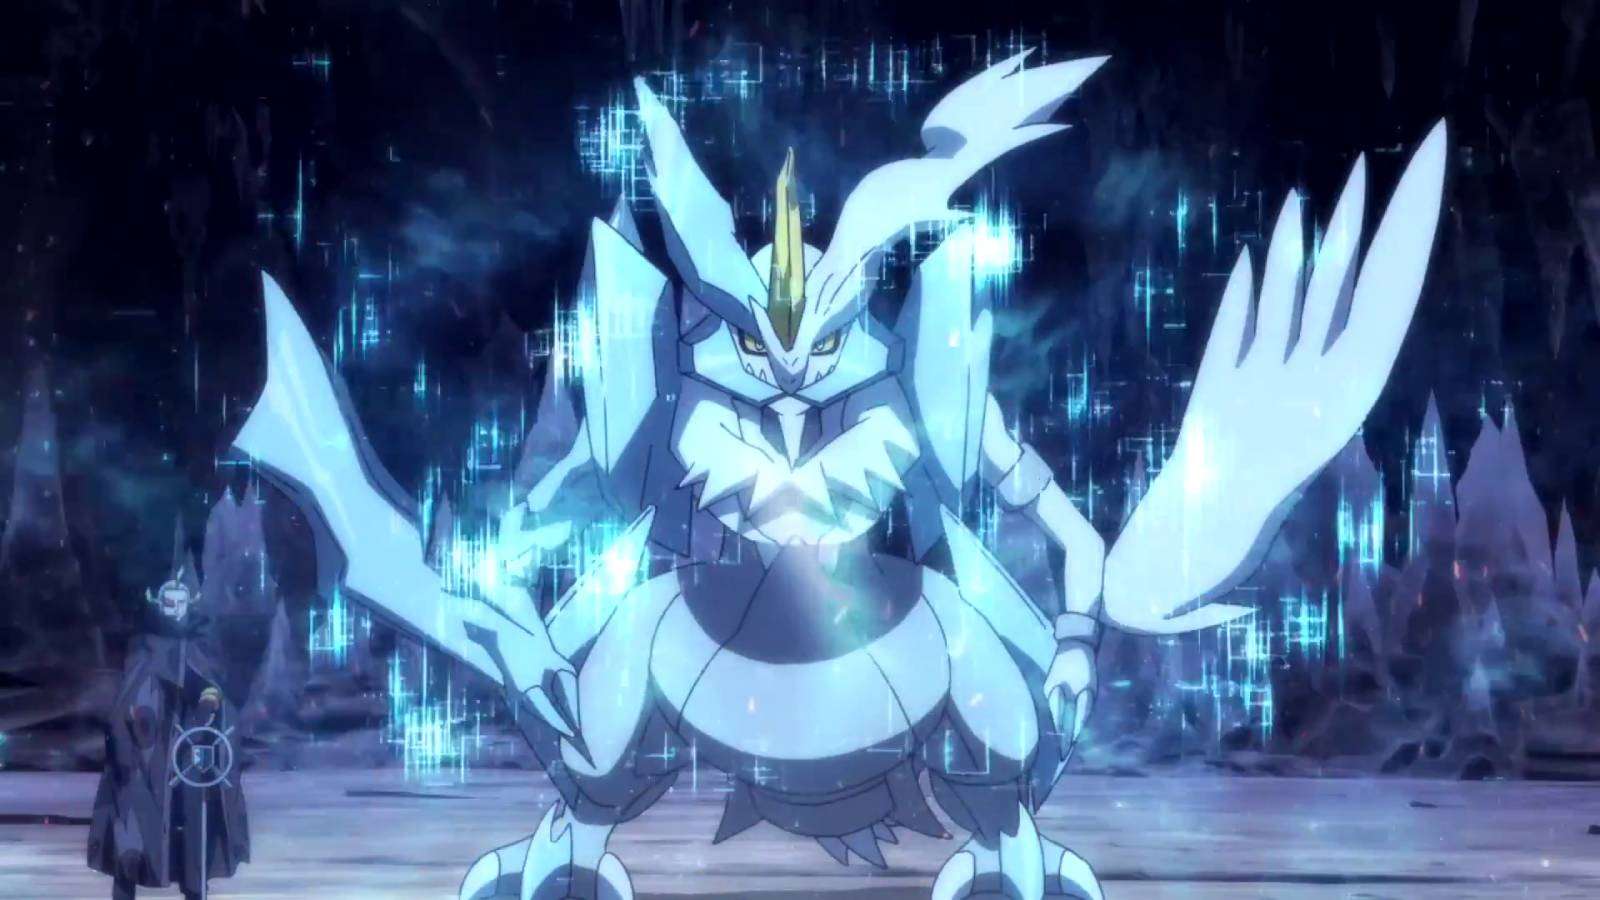 The Legendary Pokemon Kyurem stands in a cave